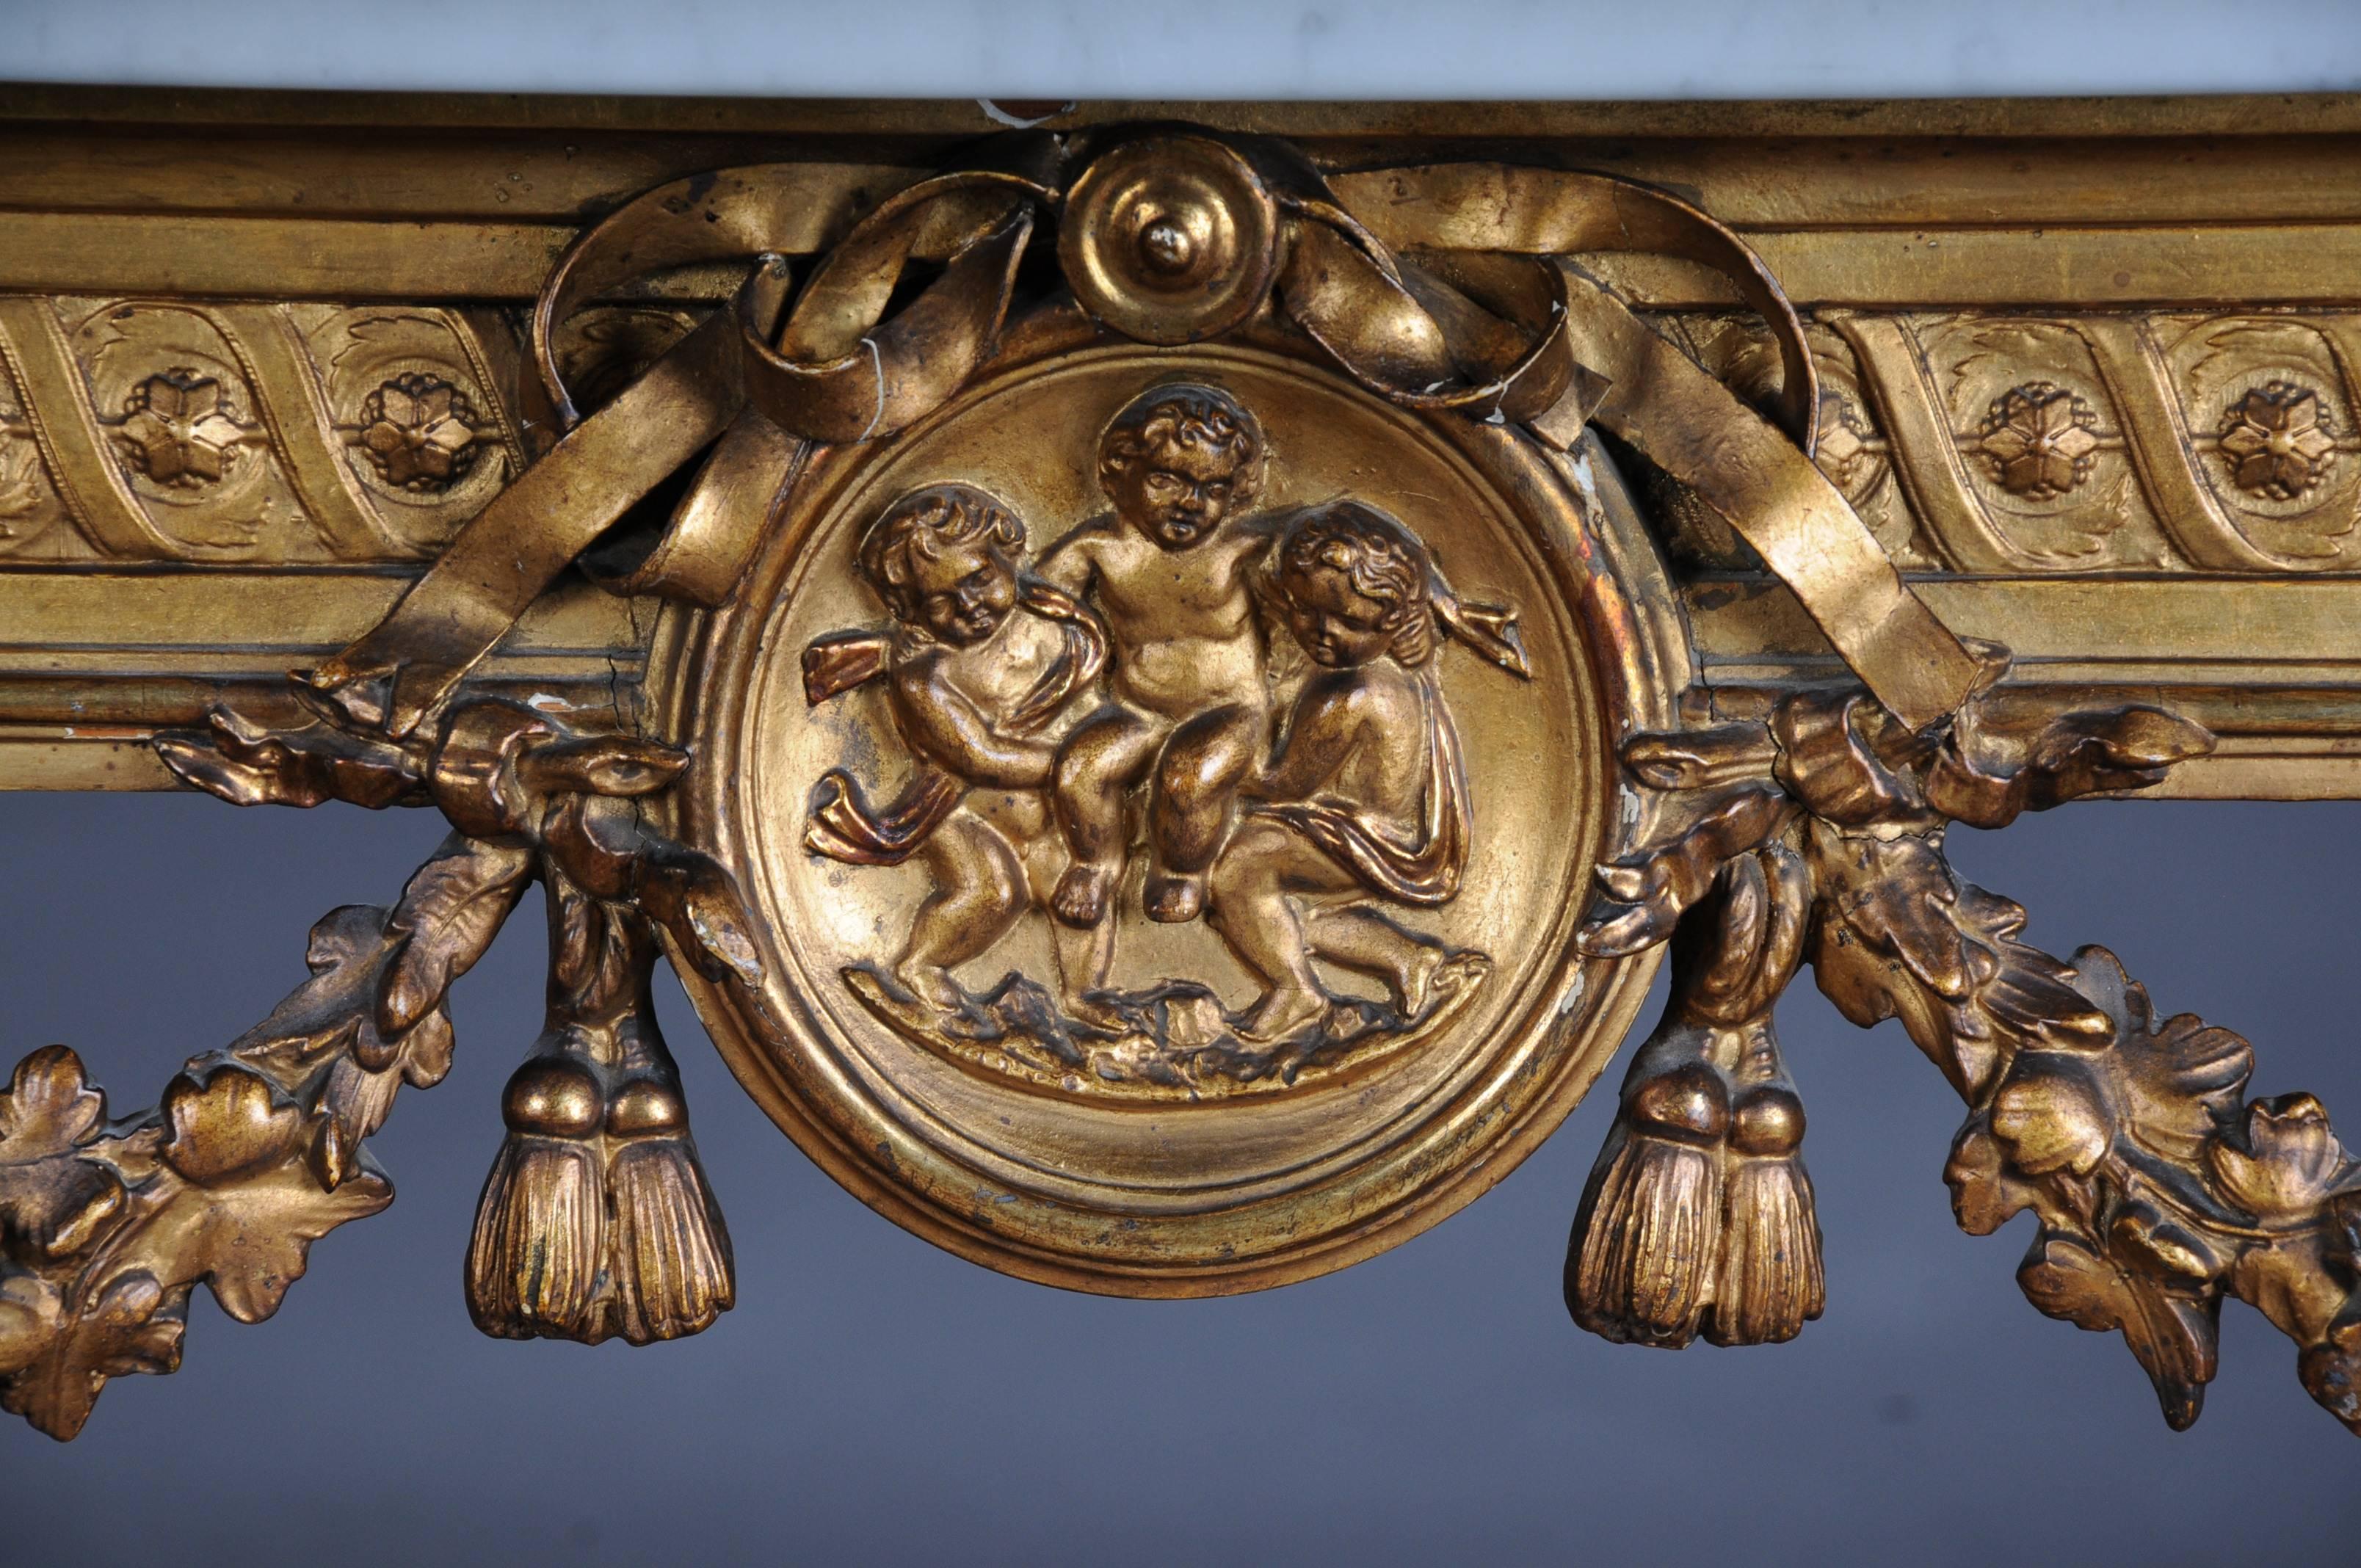 Console. Wood, gilded. Richly carved frame with fluted pillar legs. On bracing urn vase with garlands and cherubs. White marble slab, 19th century.


(E-33).